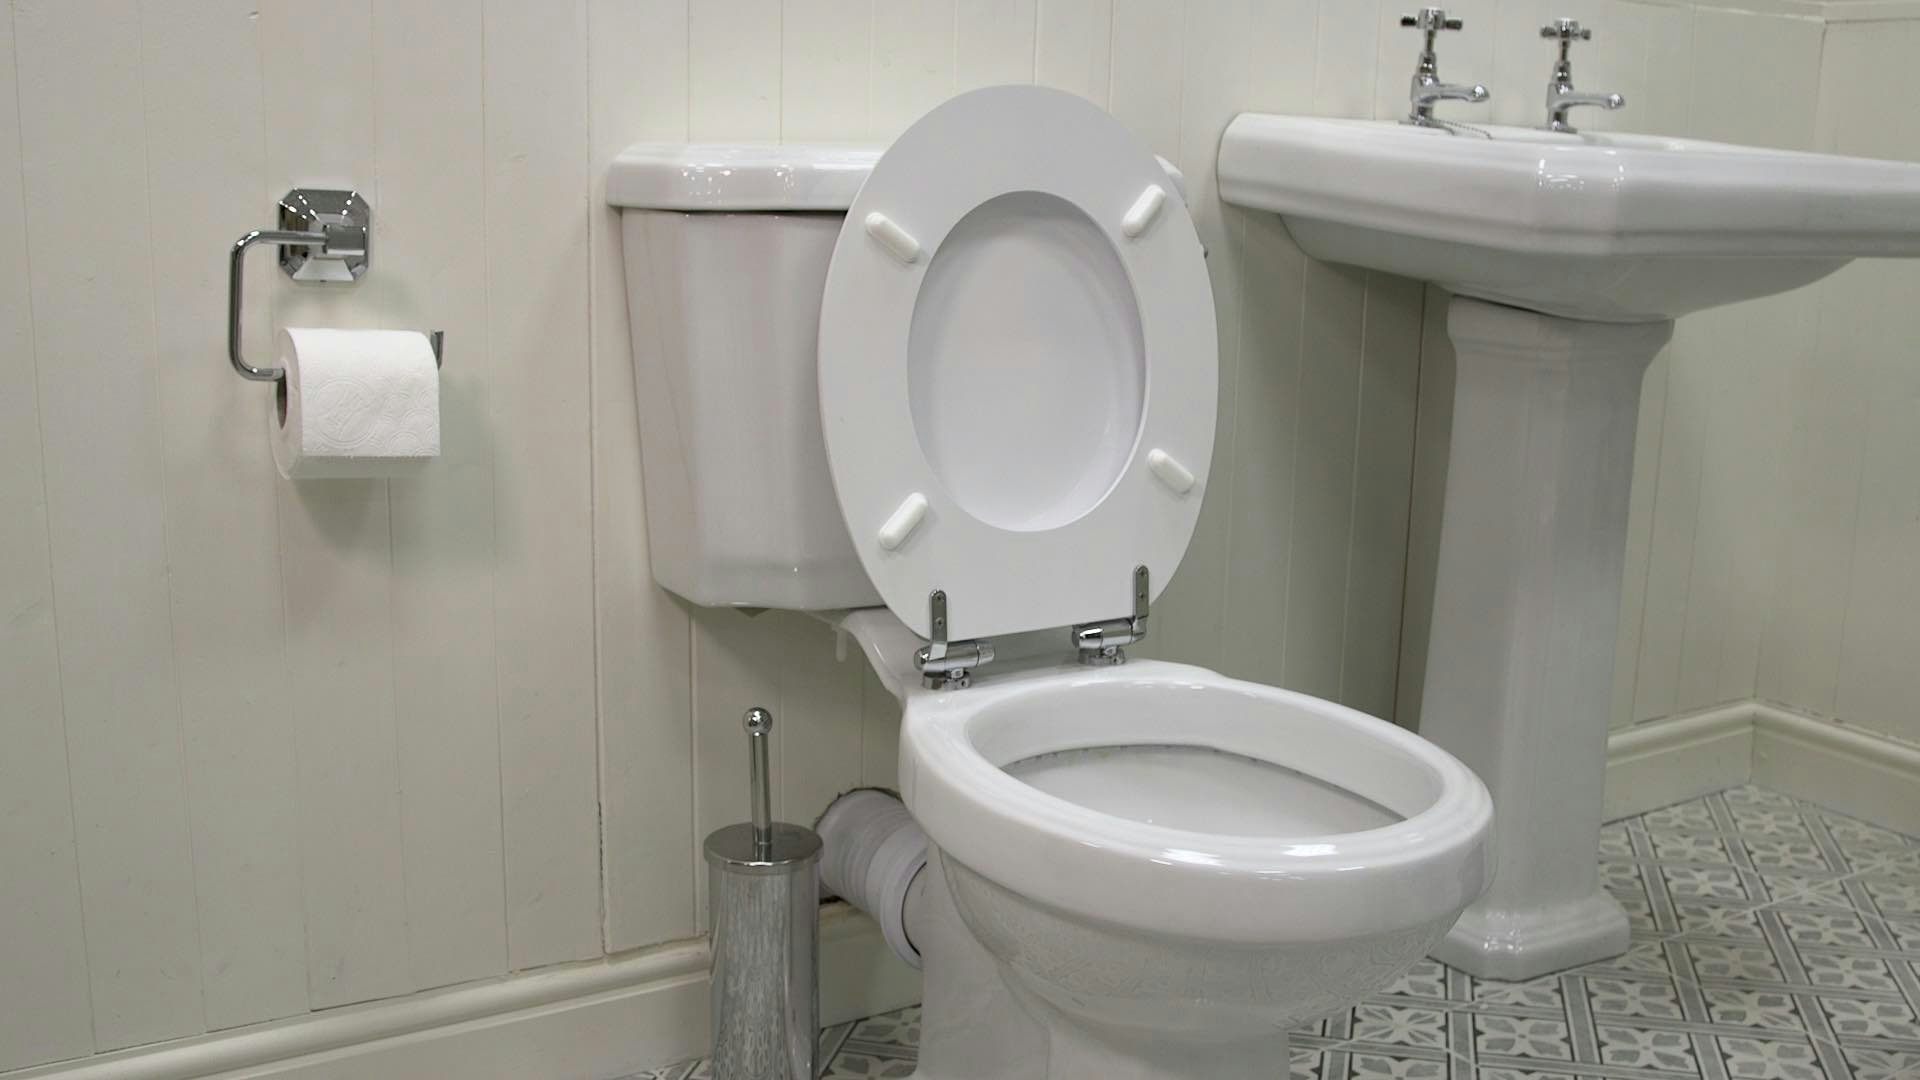 Fit the toilet seat